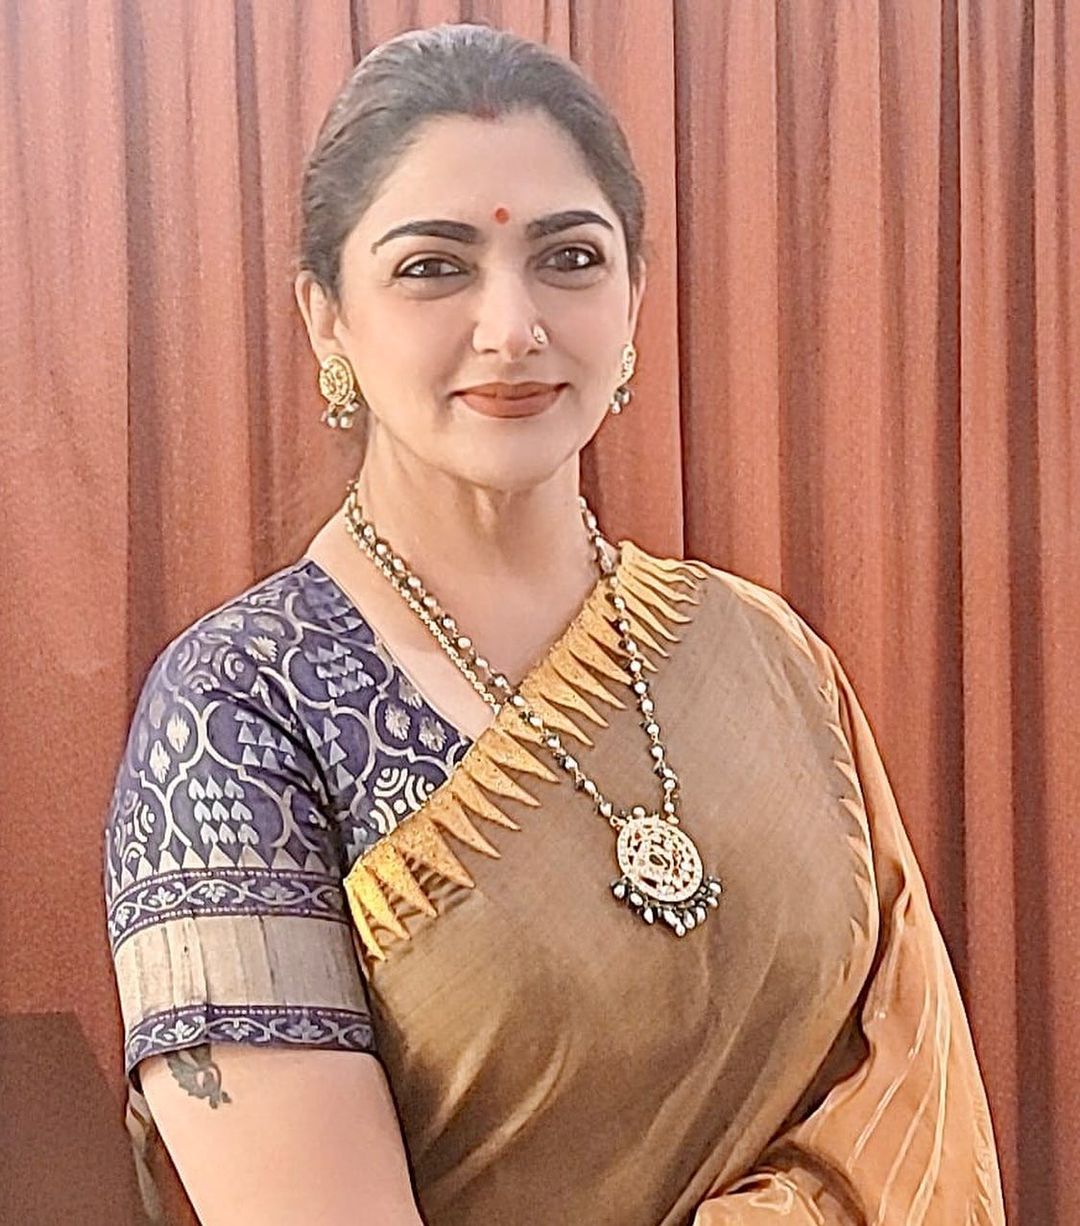 kushboo angry tweet for netizen comment and troll